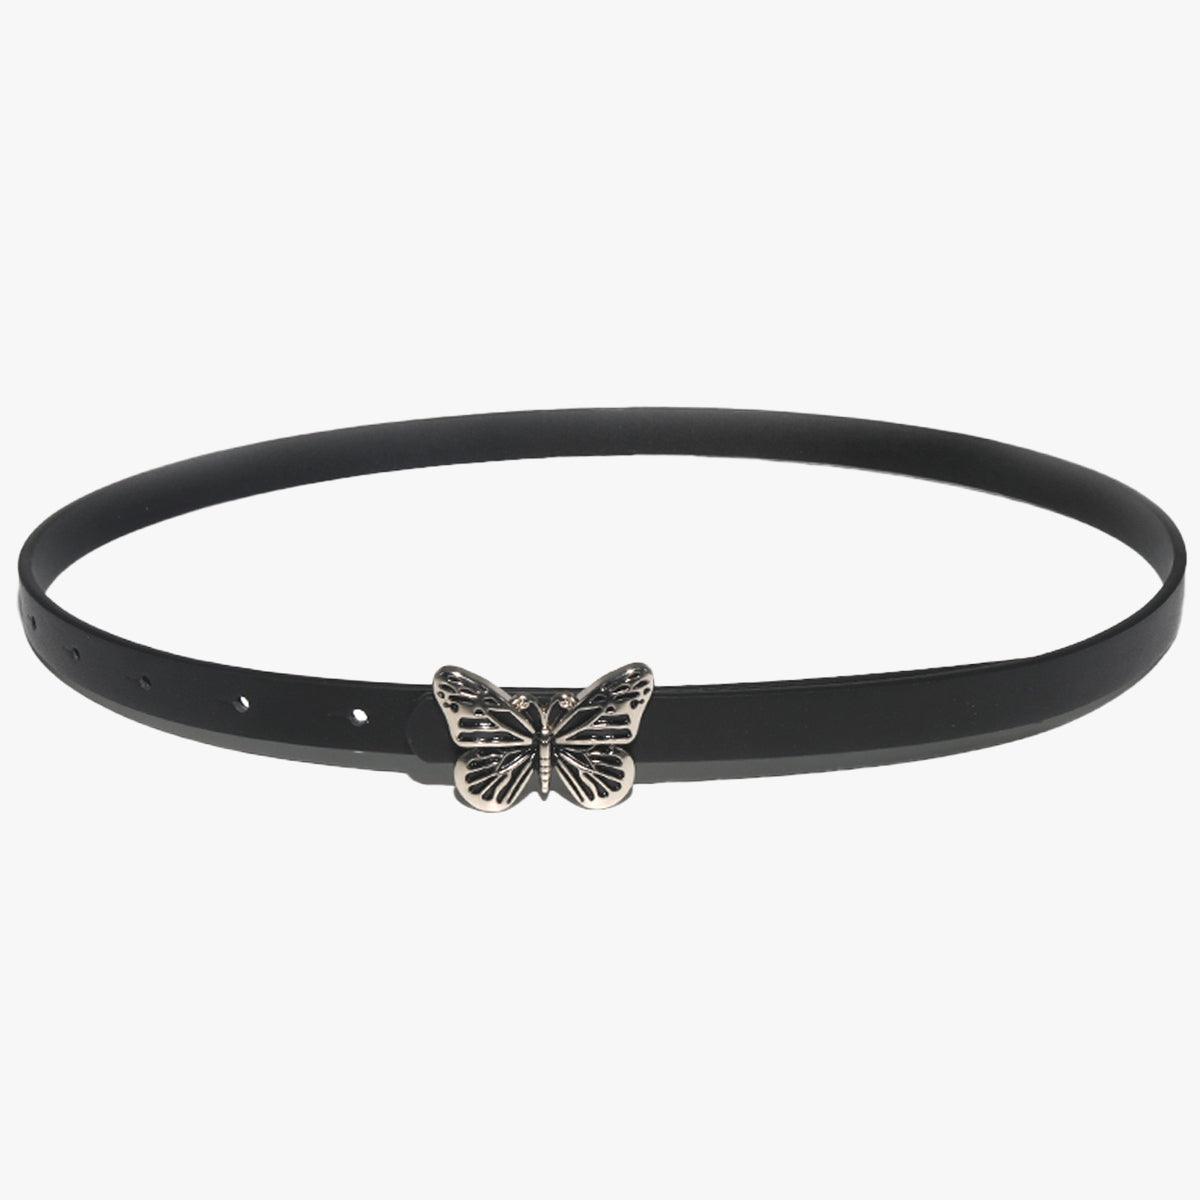 Butterfly Buckle Belt Artsy Aesthetic - Aesthetic Clothes Shop